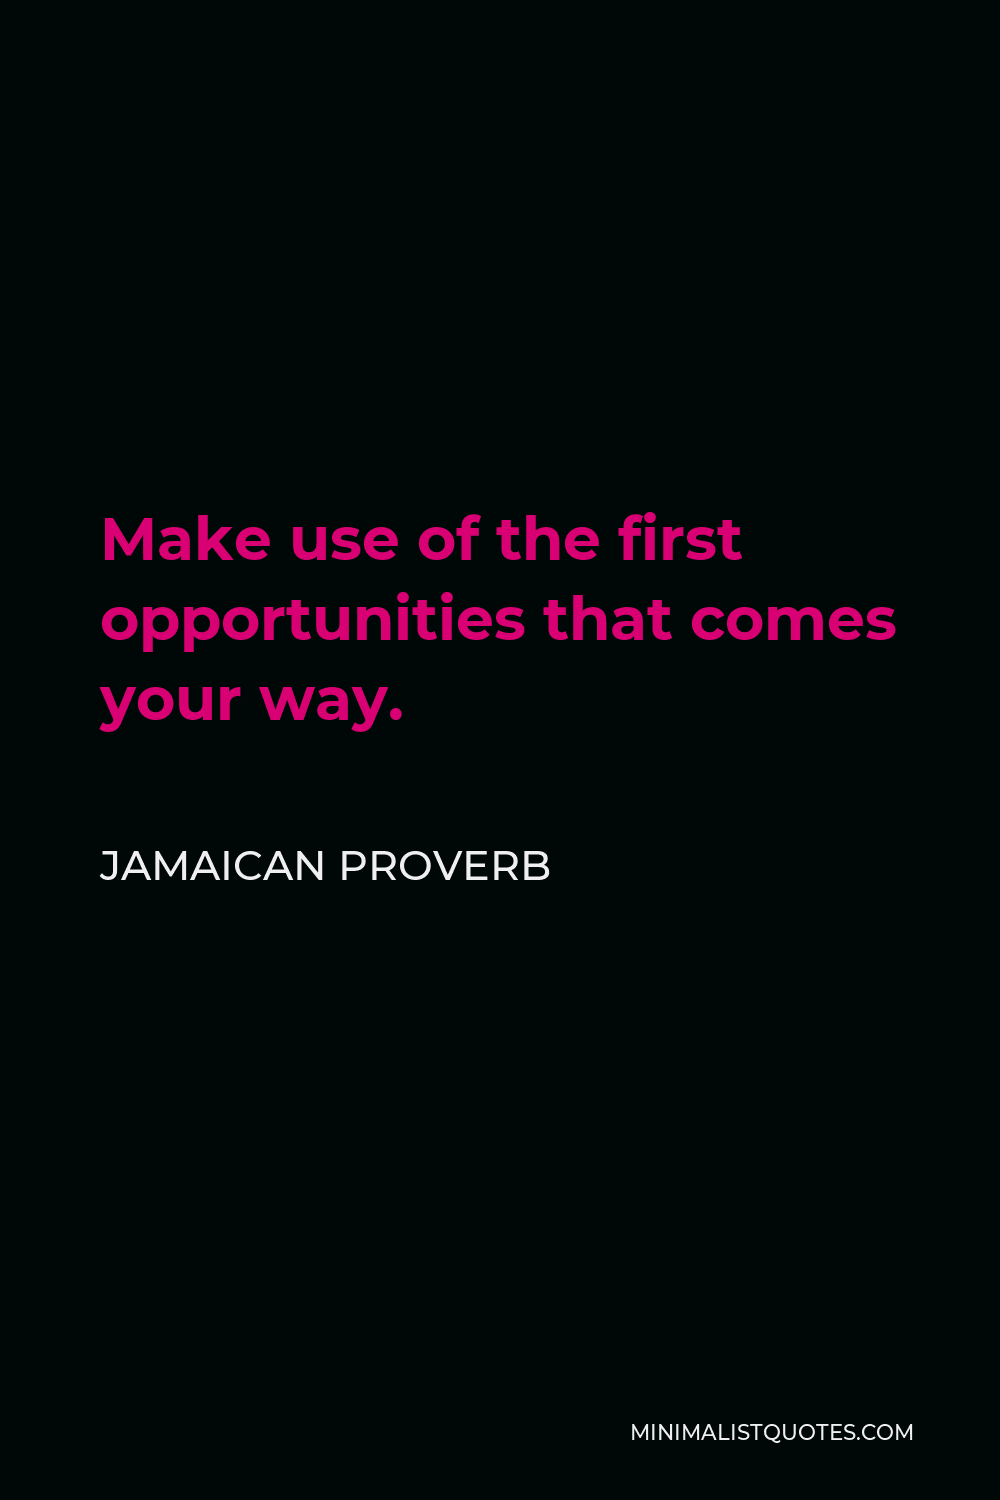 Jamaican Proverb Quote - Make use of the first opportunities that comes your way.